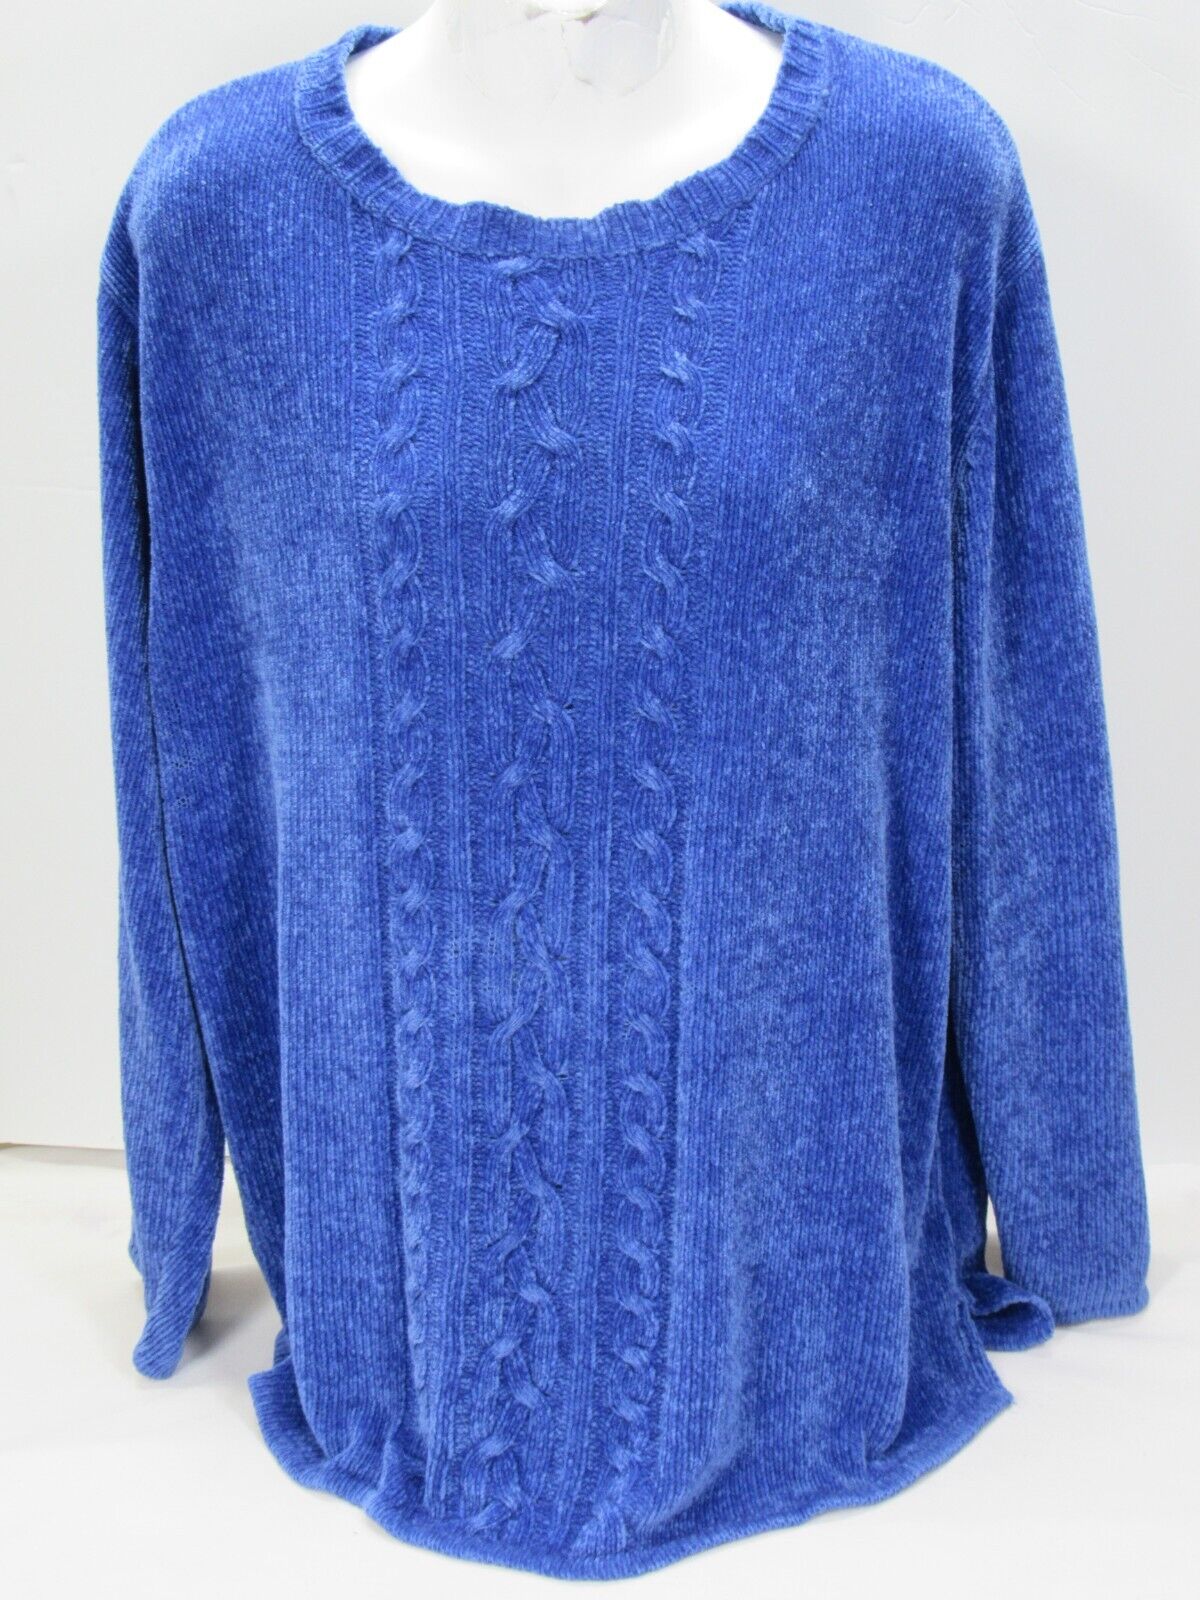 Premier International for Ladies Sweater XL [ 50 Bust 27L ] Blue Knit Pullover